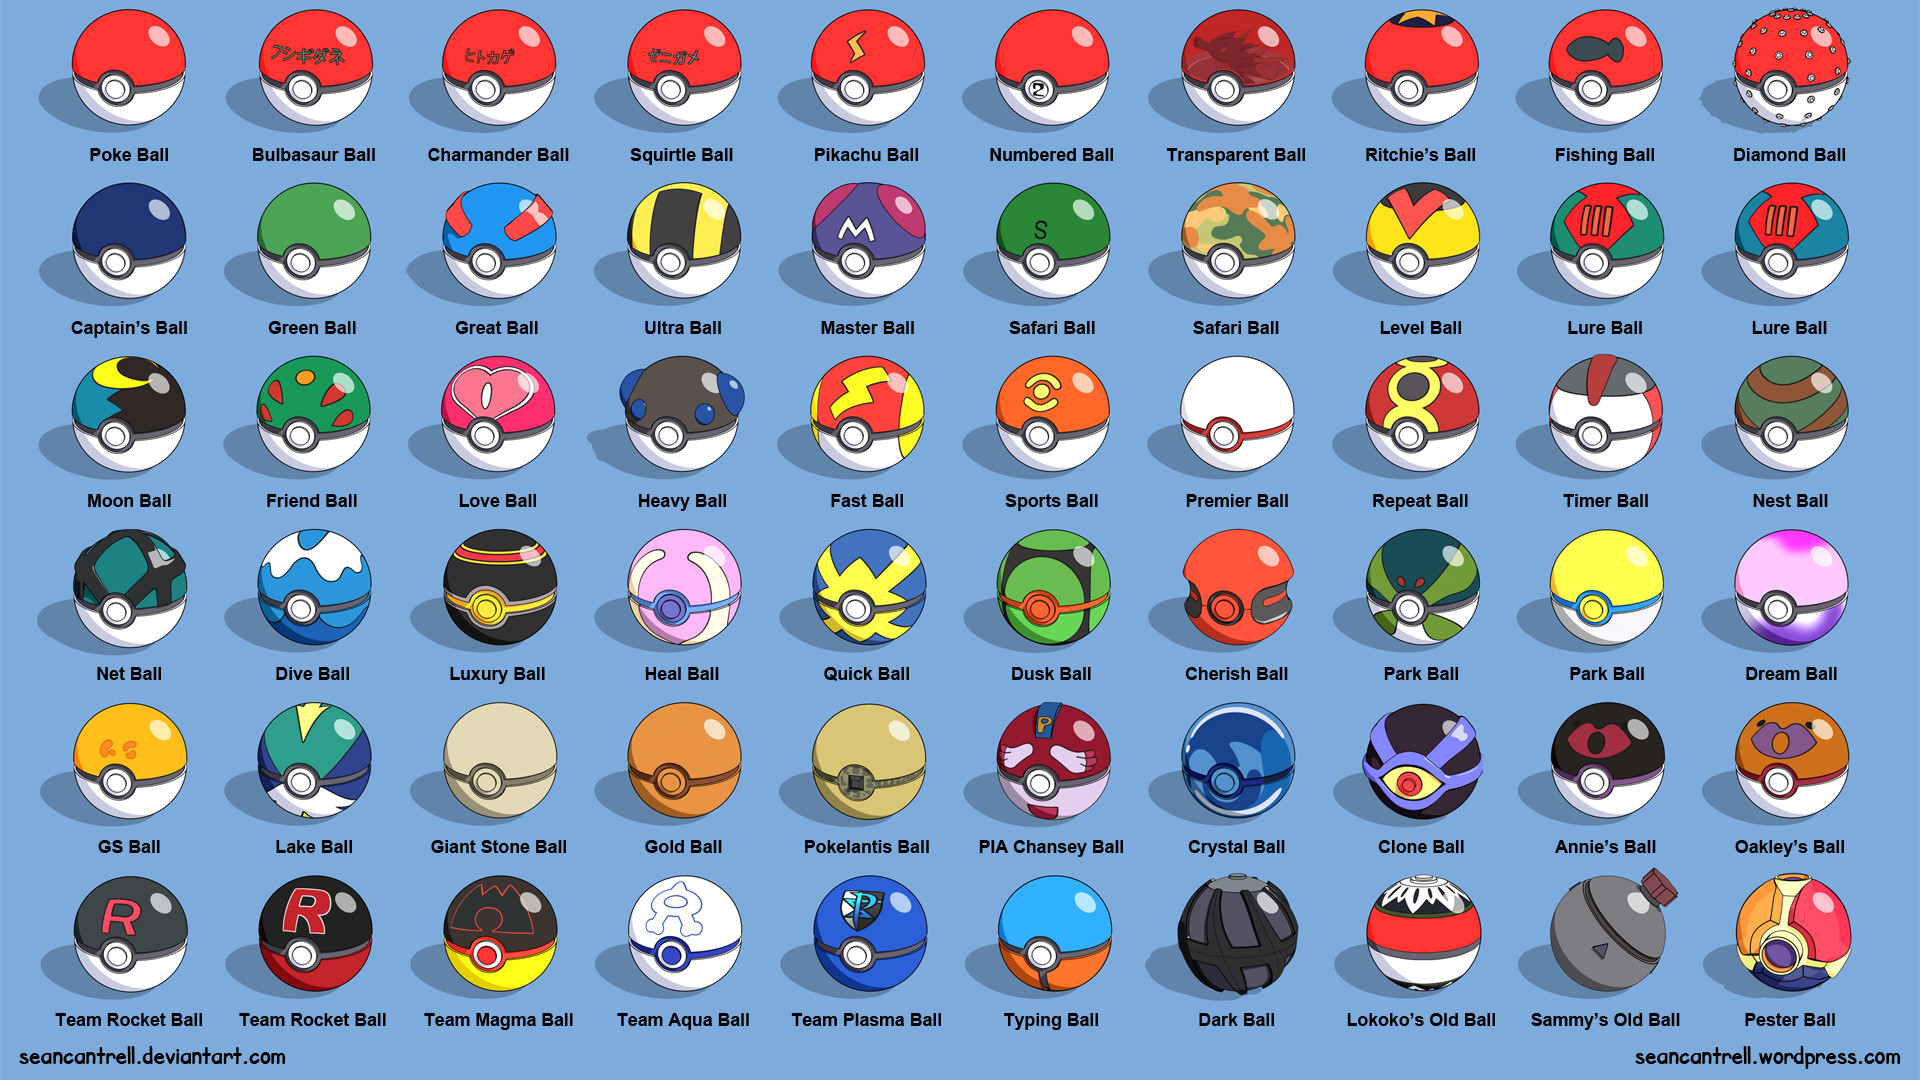 1920x1080 Pokeball, September 16, 2012 | Backgrounds PC Gallery, 0.95 Mb